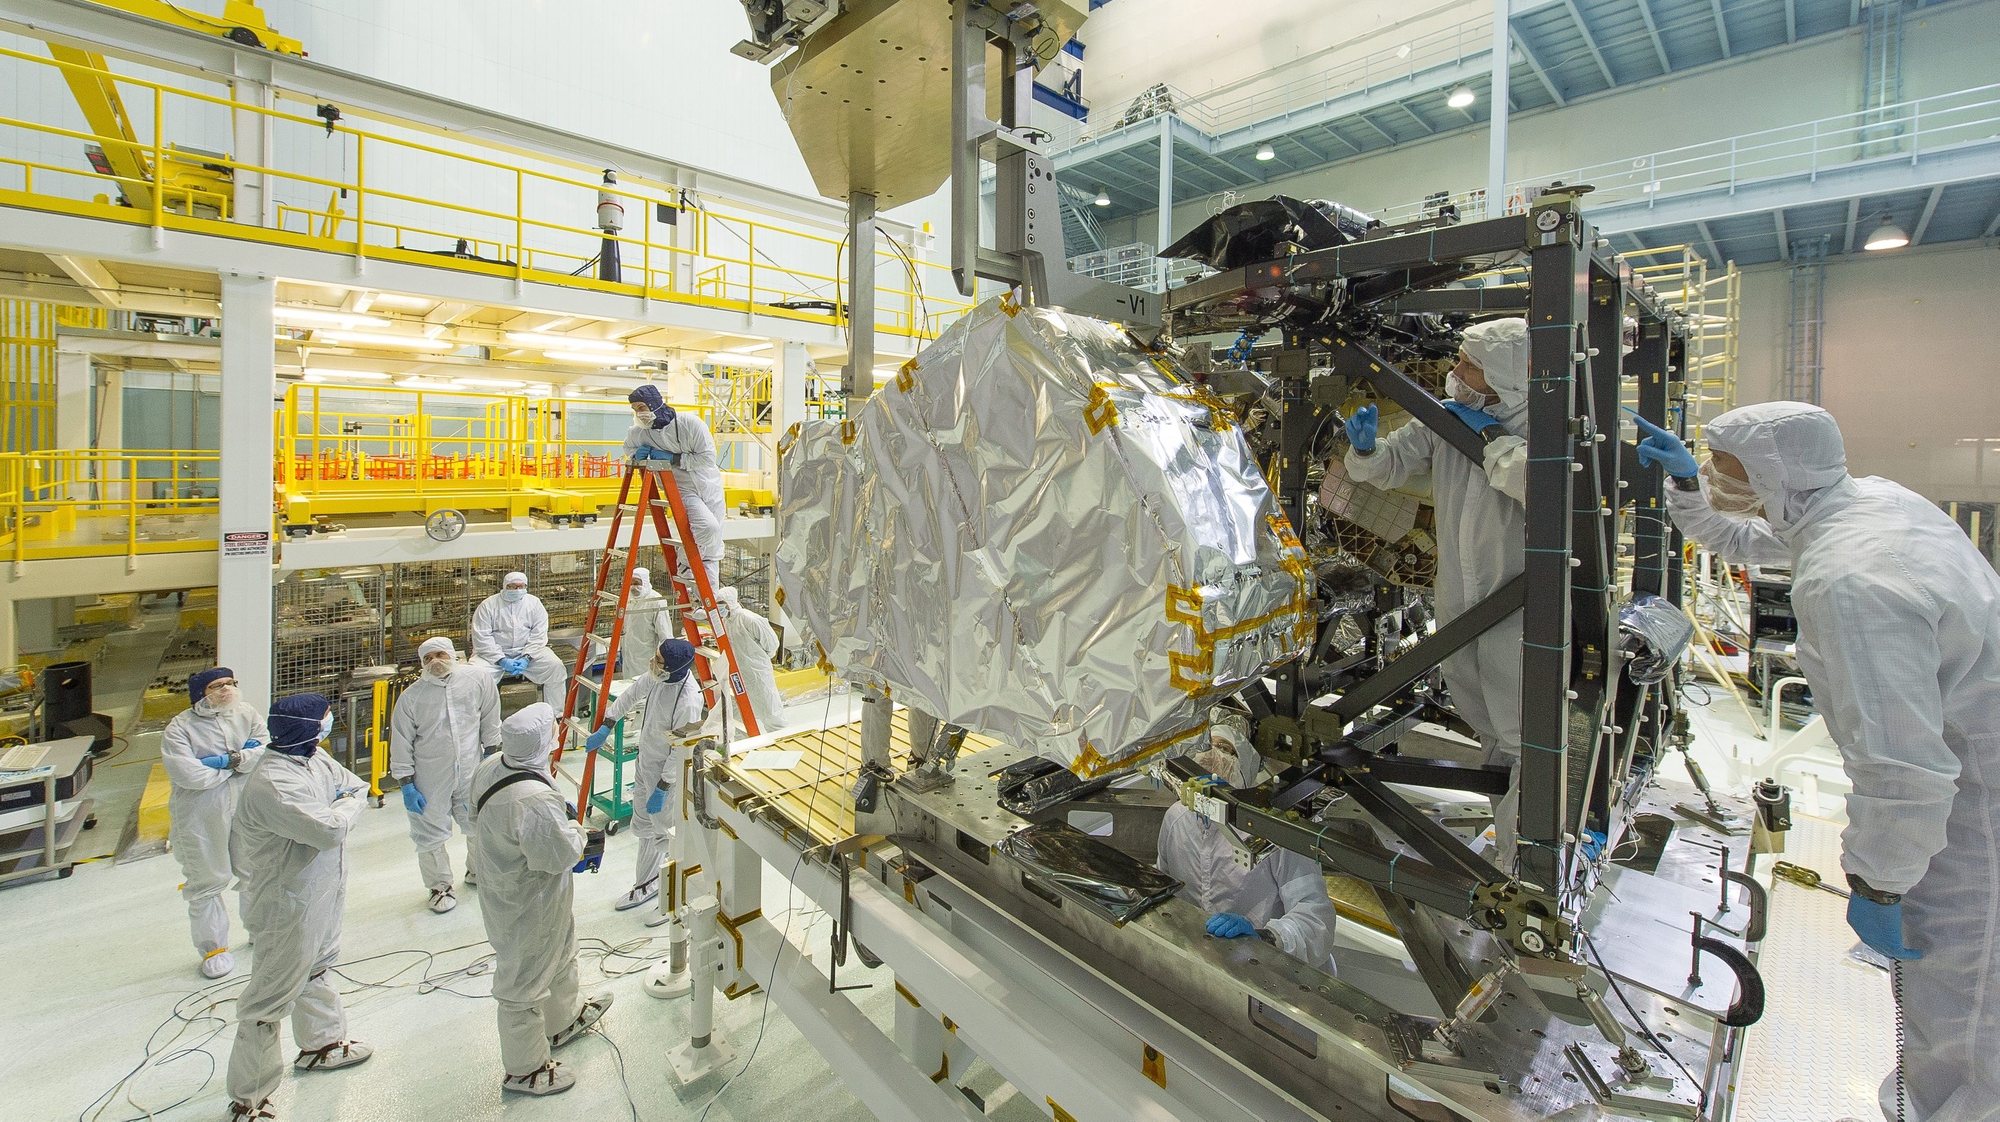 epa04151211 A handout image dated 25 March 2014 and provided by NASA 02 April 2014 showing the James Webb Space Telescope&#039;s Near Infrared Spectrograph (NIRSpec) being installed into the instrument module. The James Webb Space Telescope is a large space telescope, optimized for infrared wavelengths. It is scheduled for launch later in this decade. Webb will find the first galaxies that formed in the early universe, connecting the Big Bang to our own Milky Way galaxy. Webb will peer through dusty clouds to see stars forming planetary systems, connecting the Milky Way to our own solar system. Webb&#039;s instruments will be designed to work primarily in the infrared range of the electromagnetic spectrum, with some capability in the visible range.  EPA/NASA / CHRIS GUNN / HANDOUT  HANDOUT EDITORIAL USE ONLY